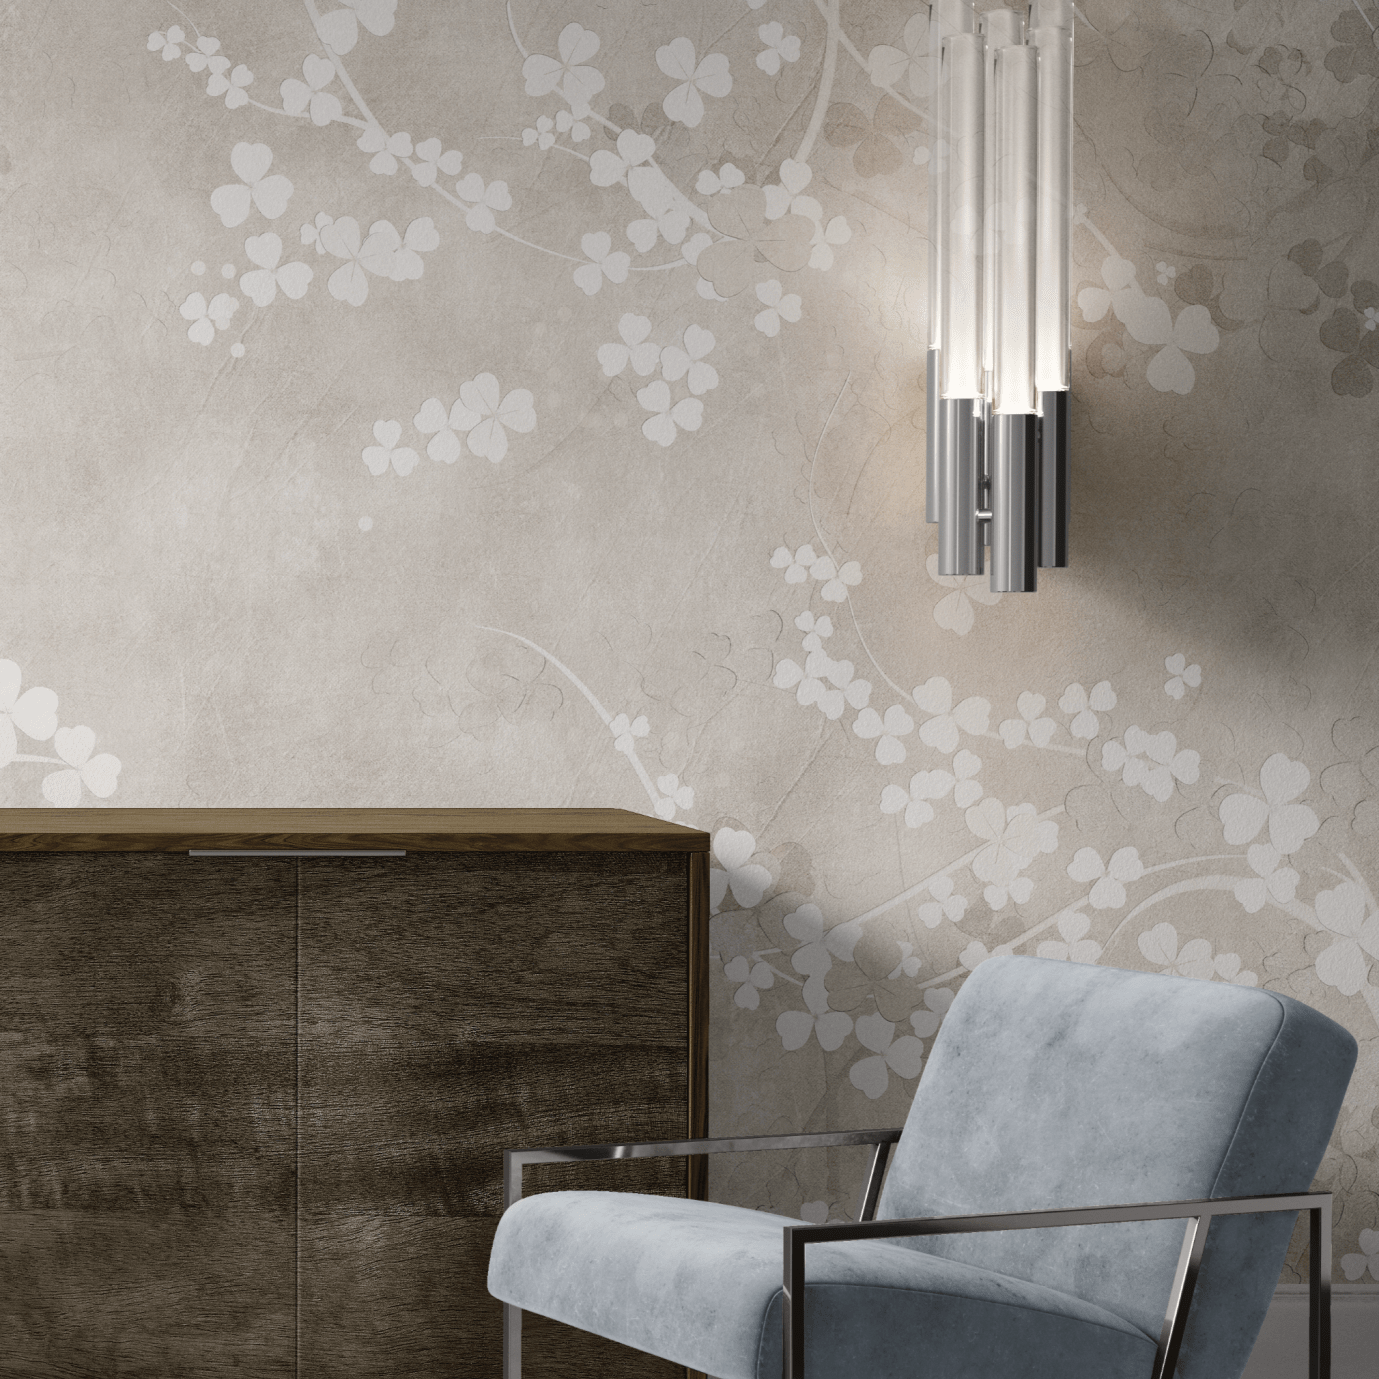 A contemporary room with a neutral beige fresco wall mural featuring a floral design, paired with a sleek blue armchair and a modern vertical light fixture above a wooden cabinet.